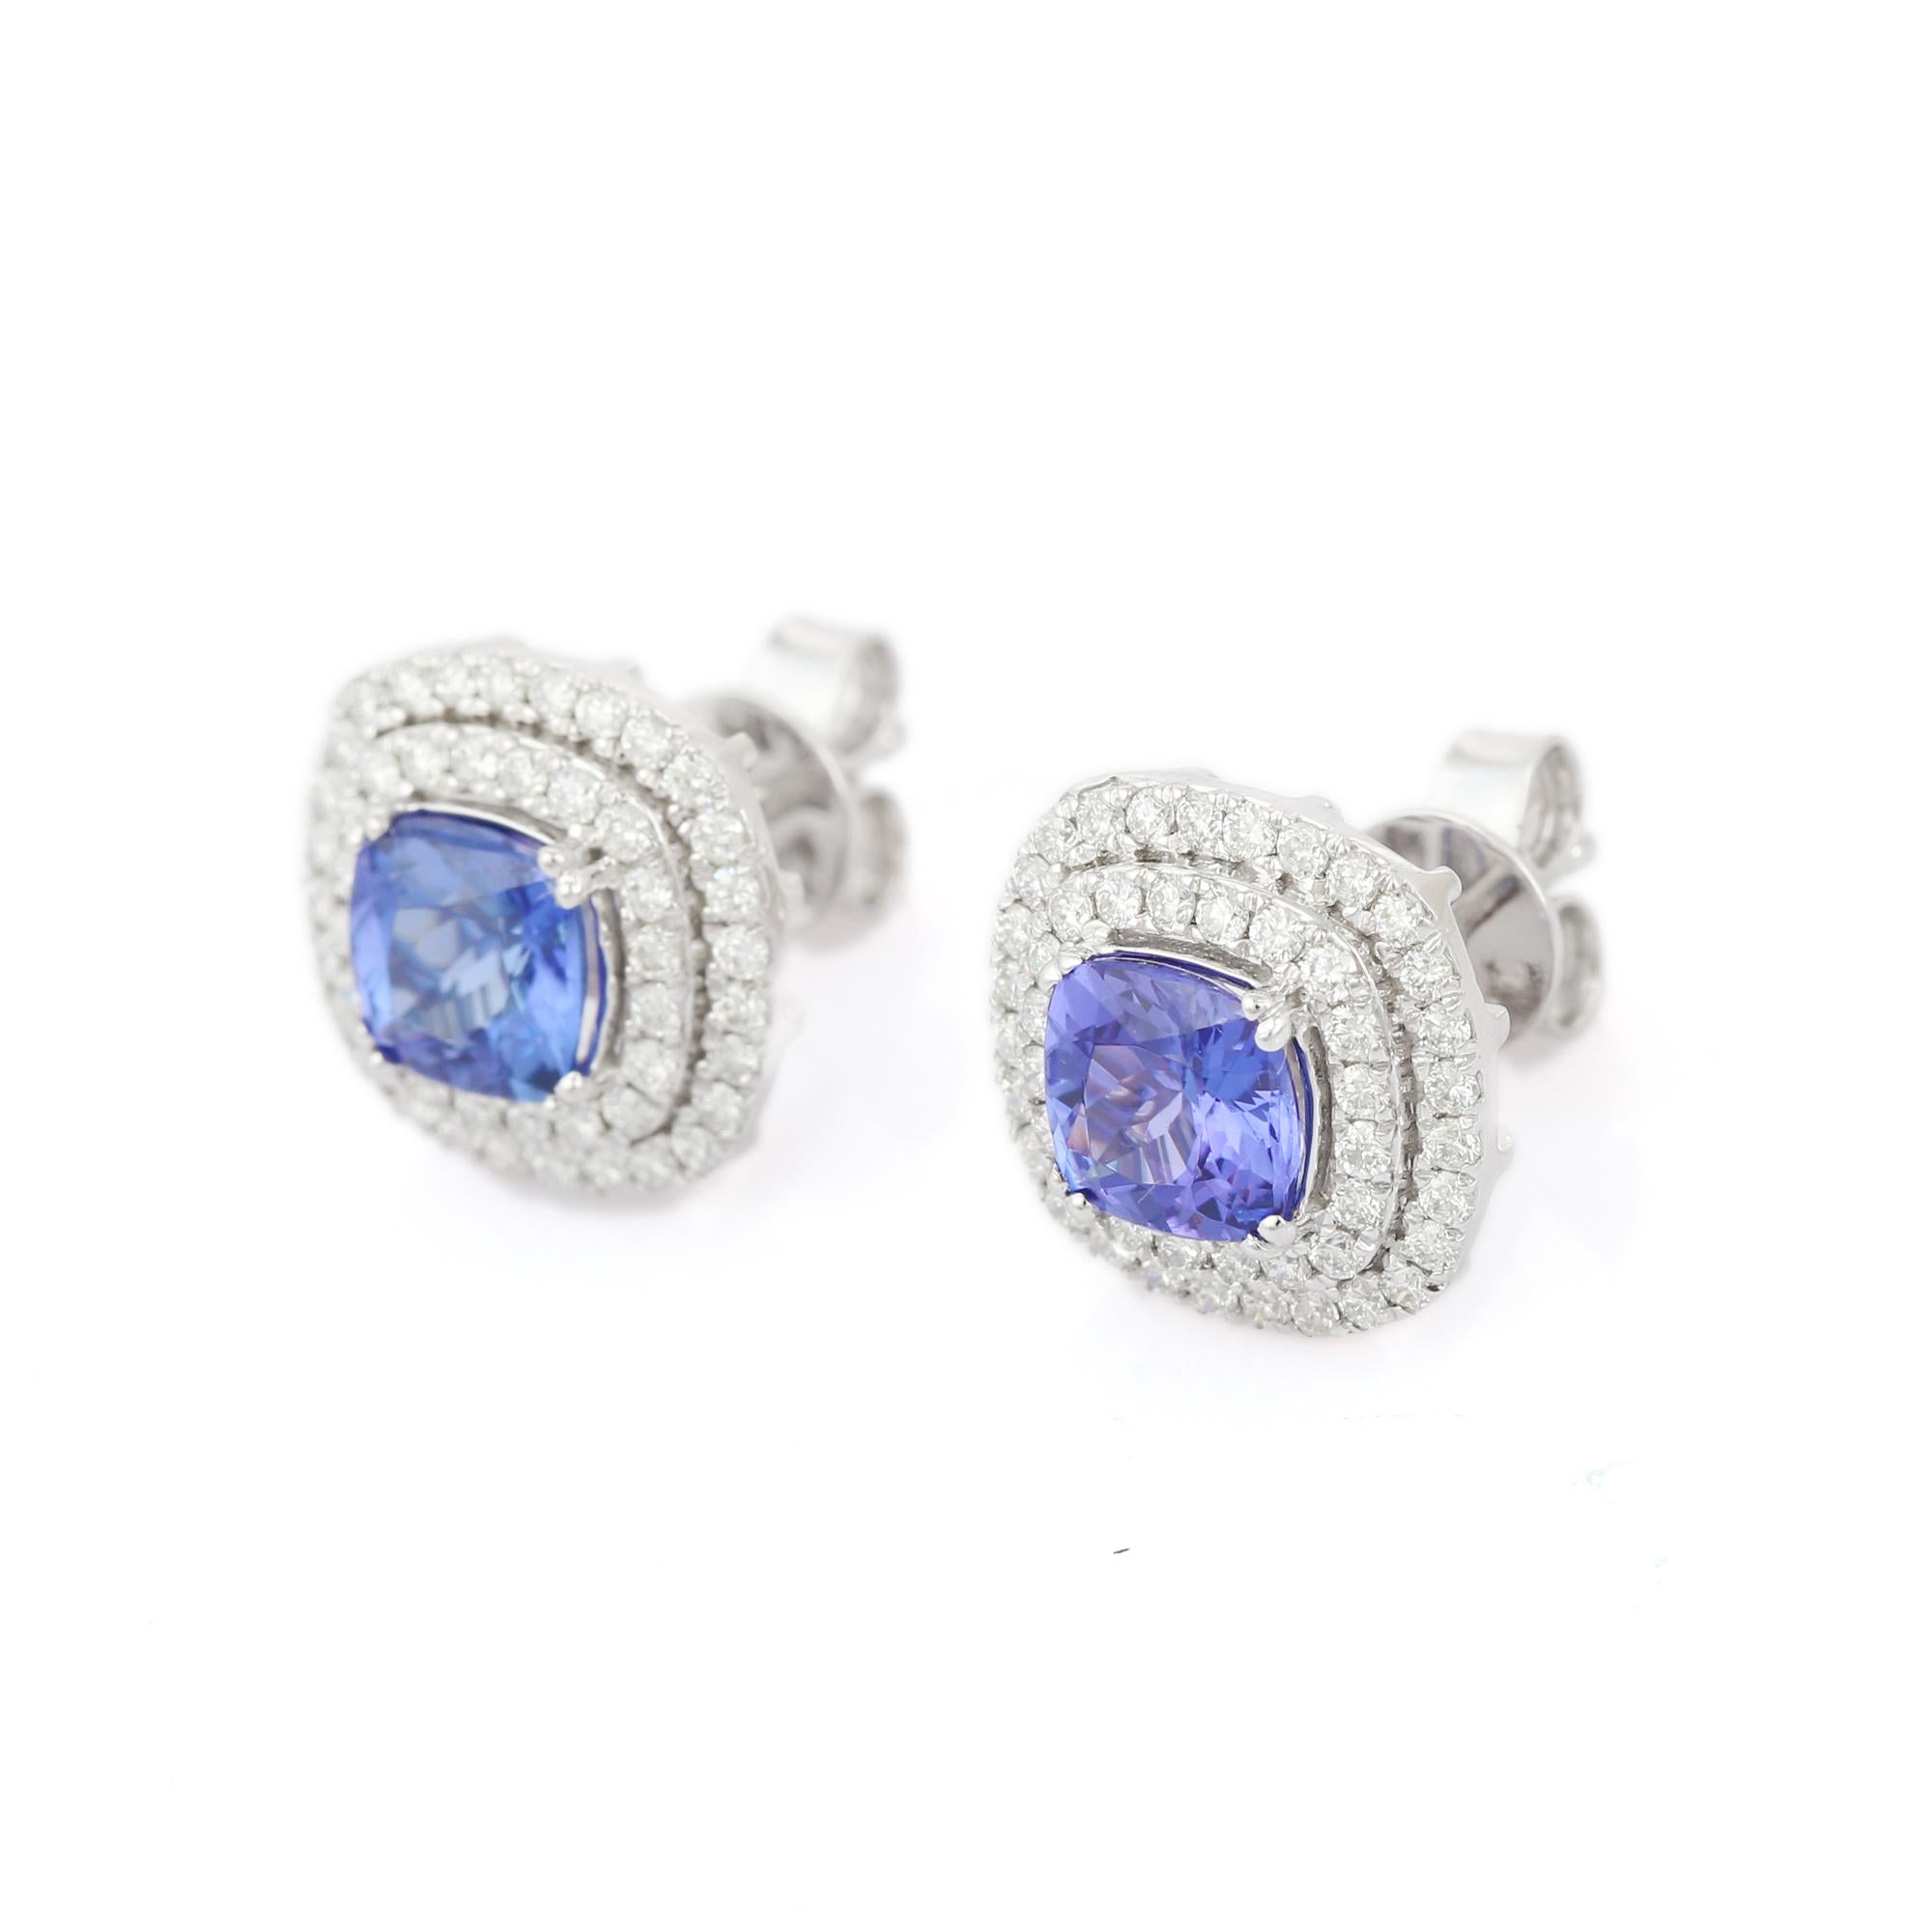 Studs create a subtle beauty while showcasing the colors of the natural precious gemstones and illuminating diamonds making a statement.

Cushion cut tanzanite studs with diamonds in 18K white gold. Embrace your look with these stunning pair of